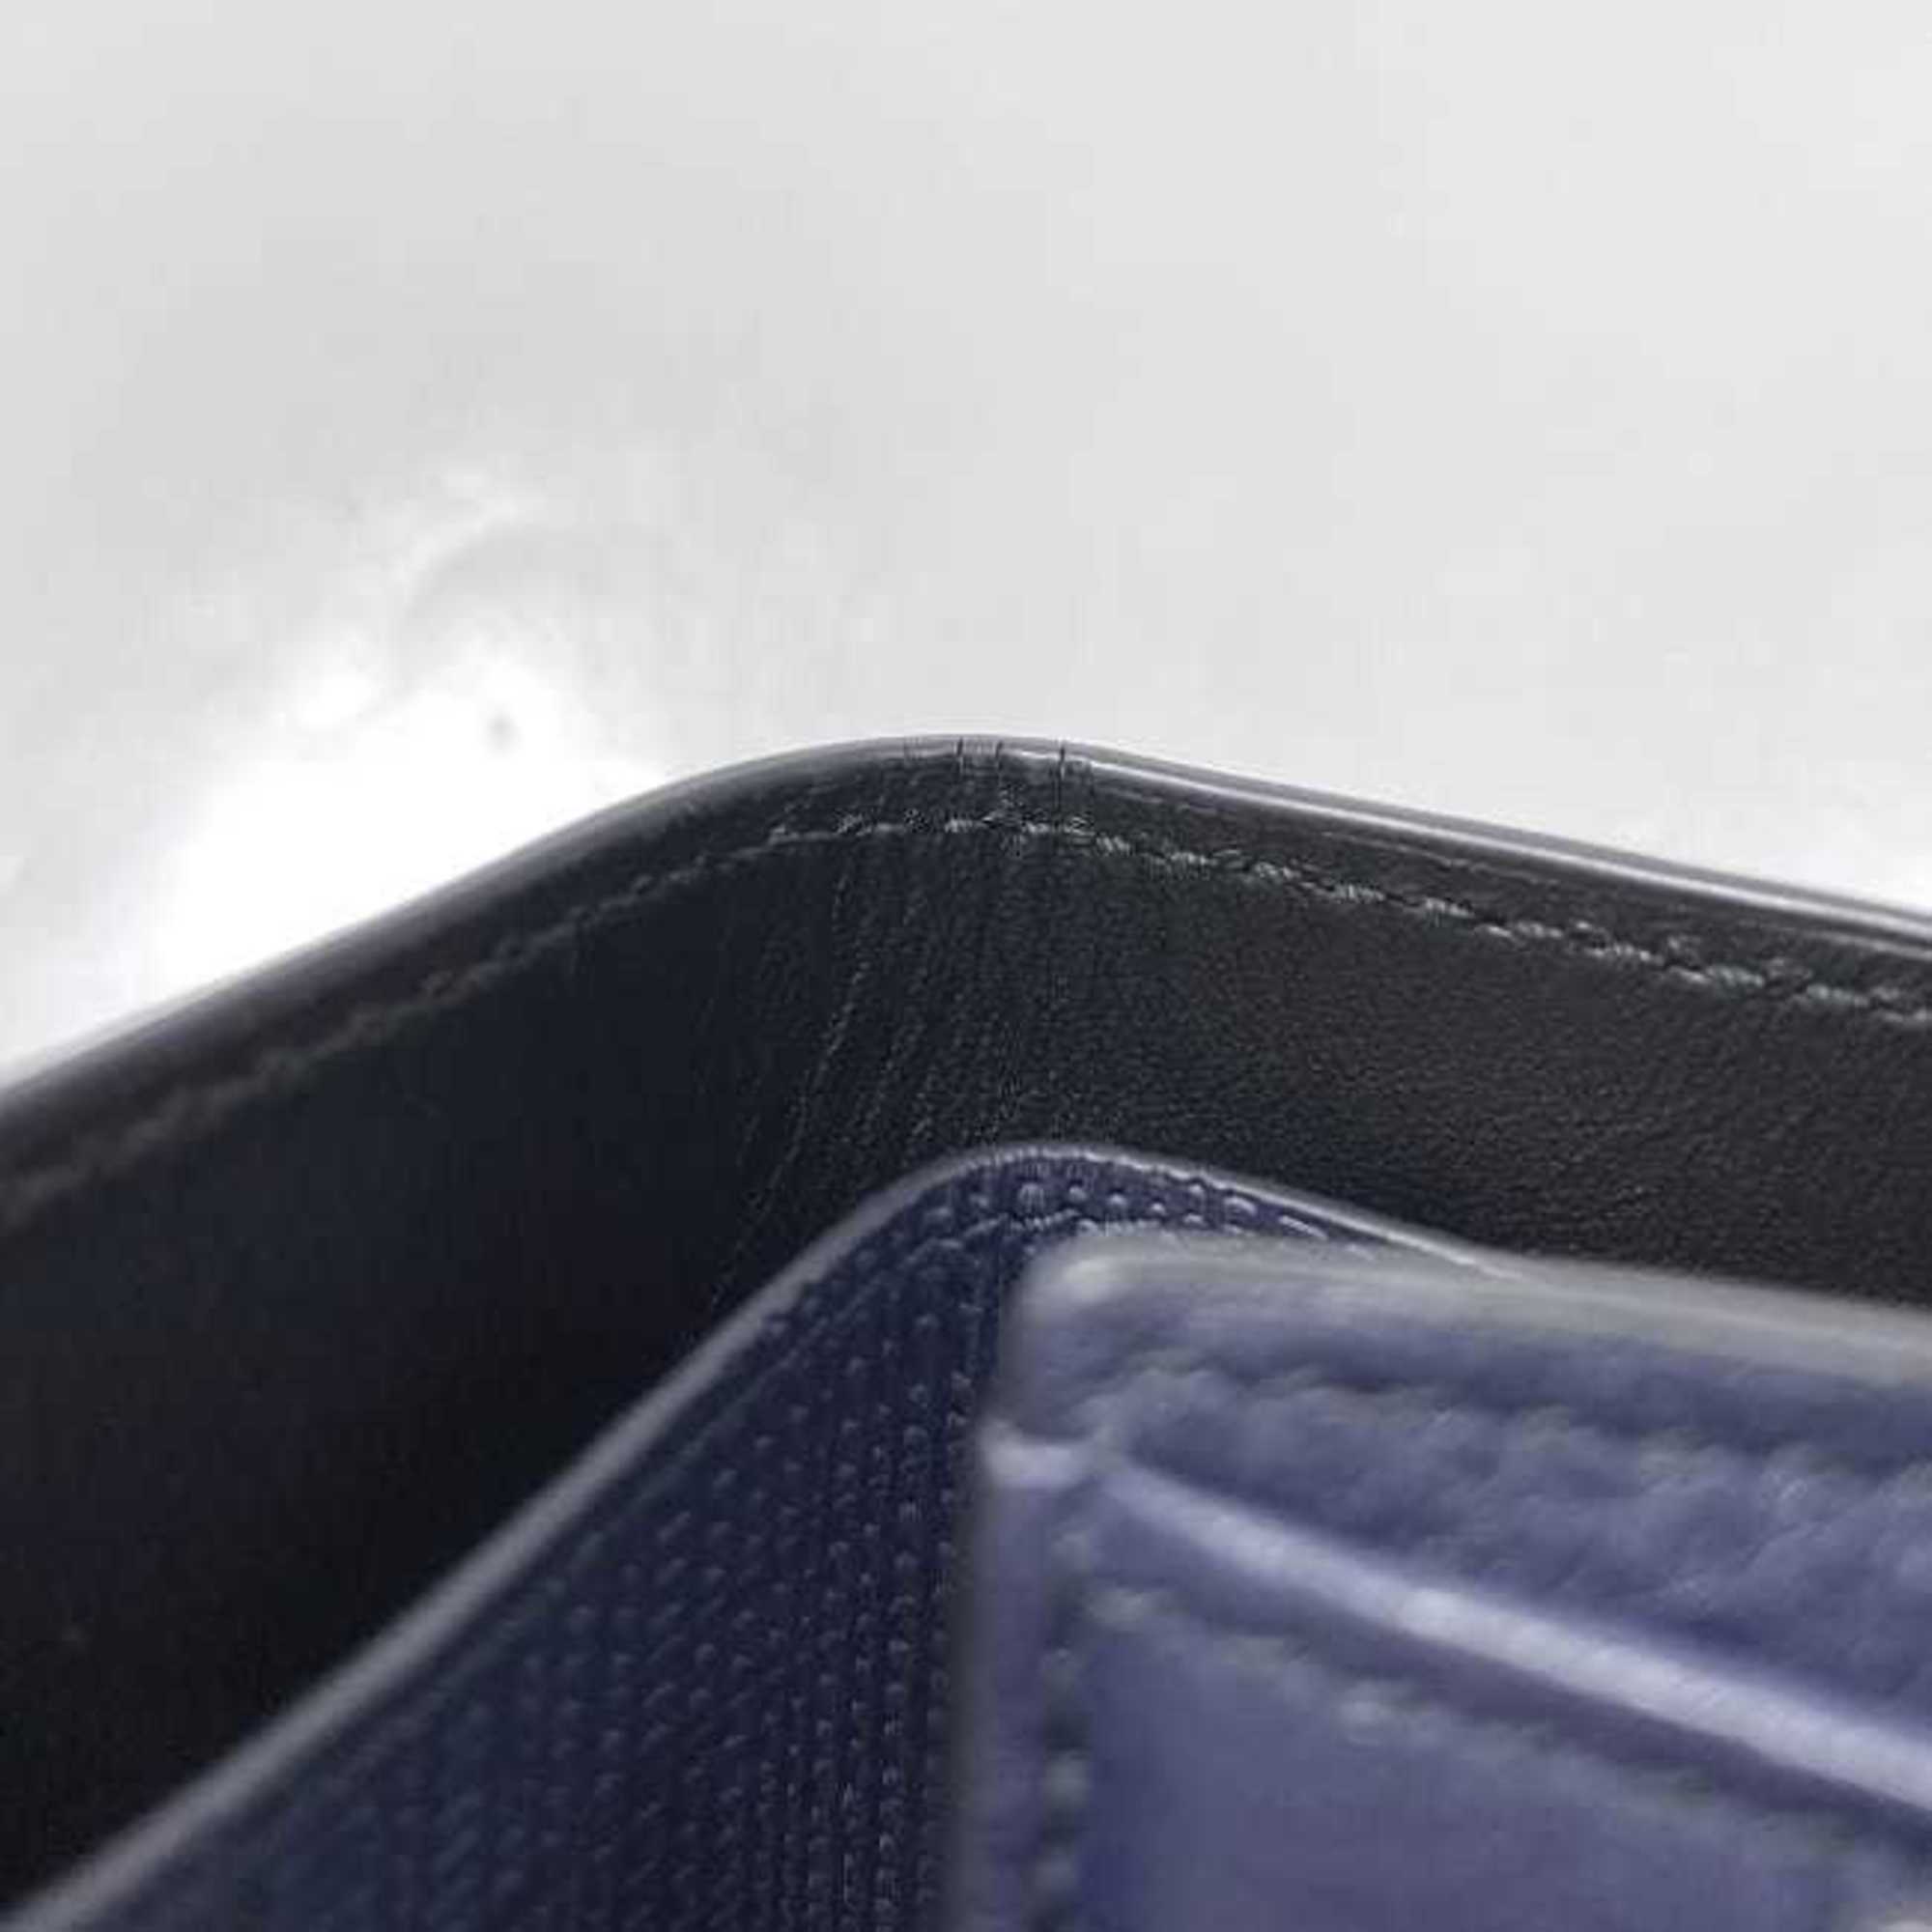 LOEWE Tri-fold Wallet Navy Repeat Anagram 101.88.S26 f-20476 Leather Grained Compact